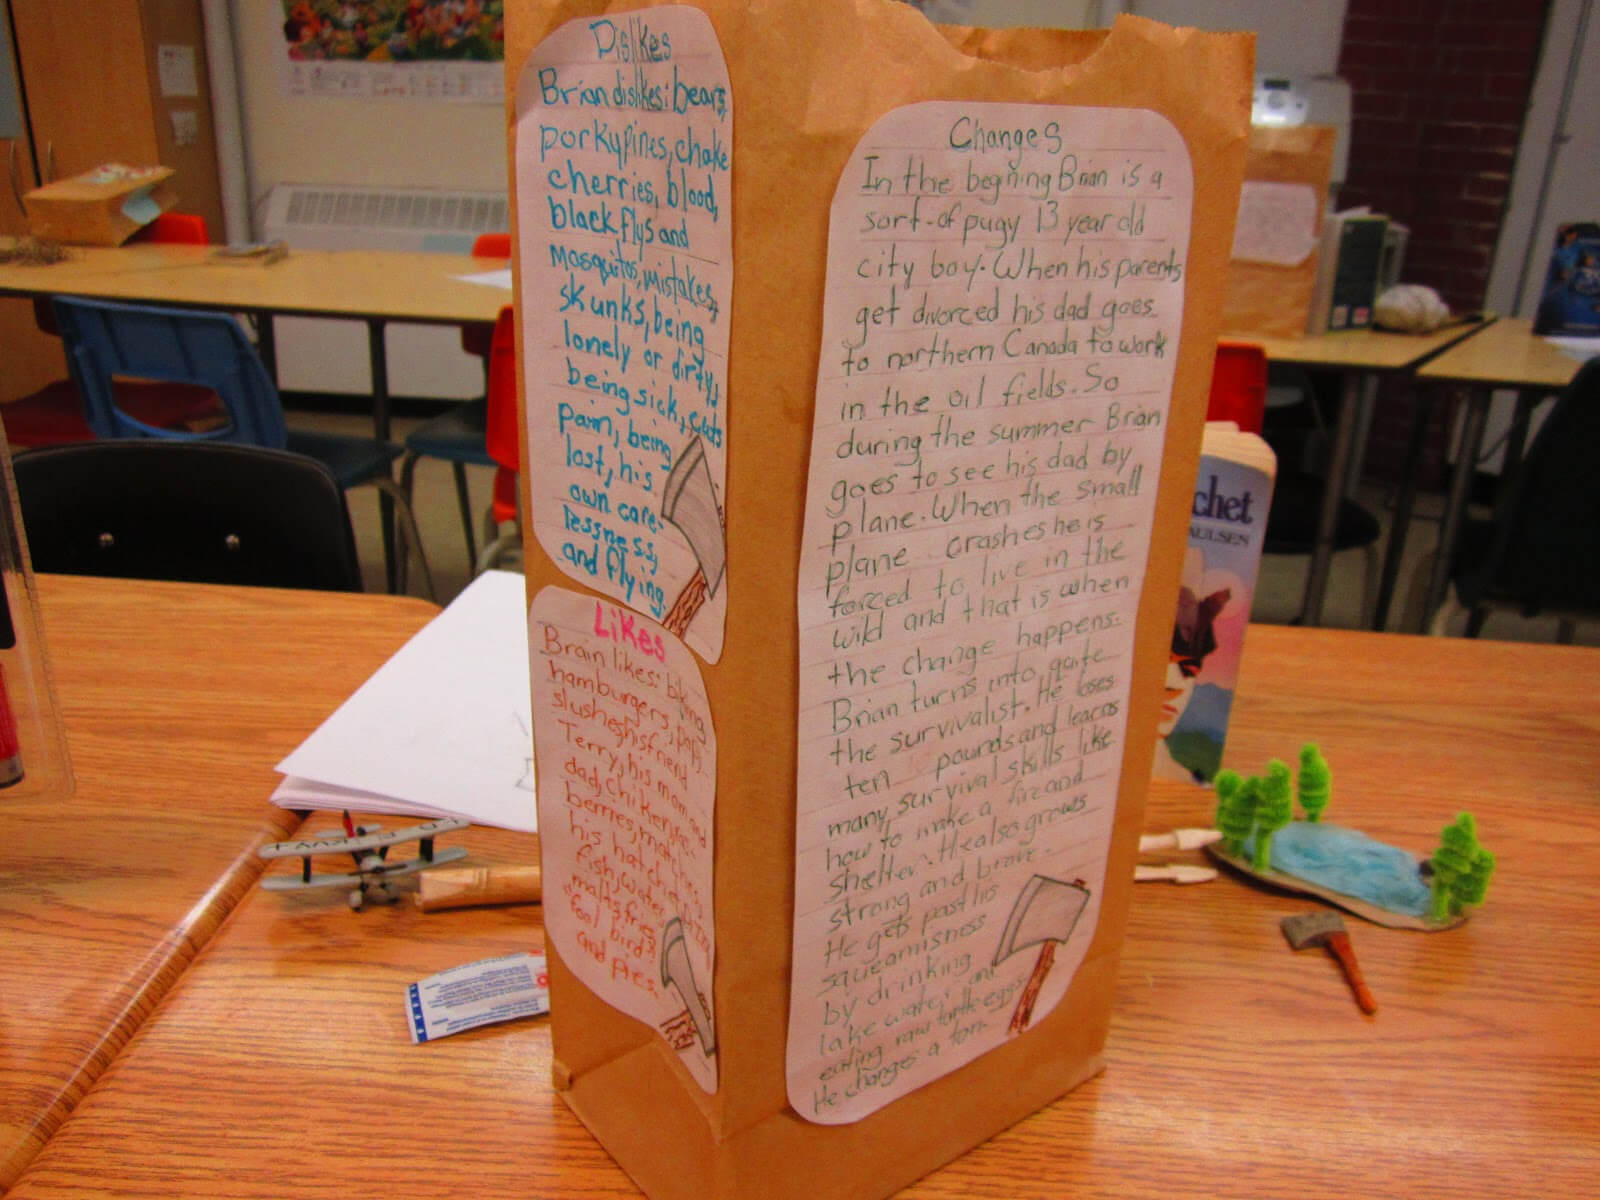 Paper Bag Characterization | Runde's Room Within Paper Bag Book Report Template